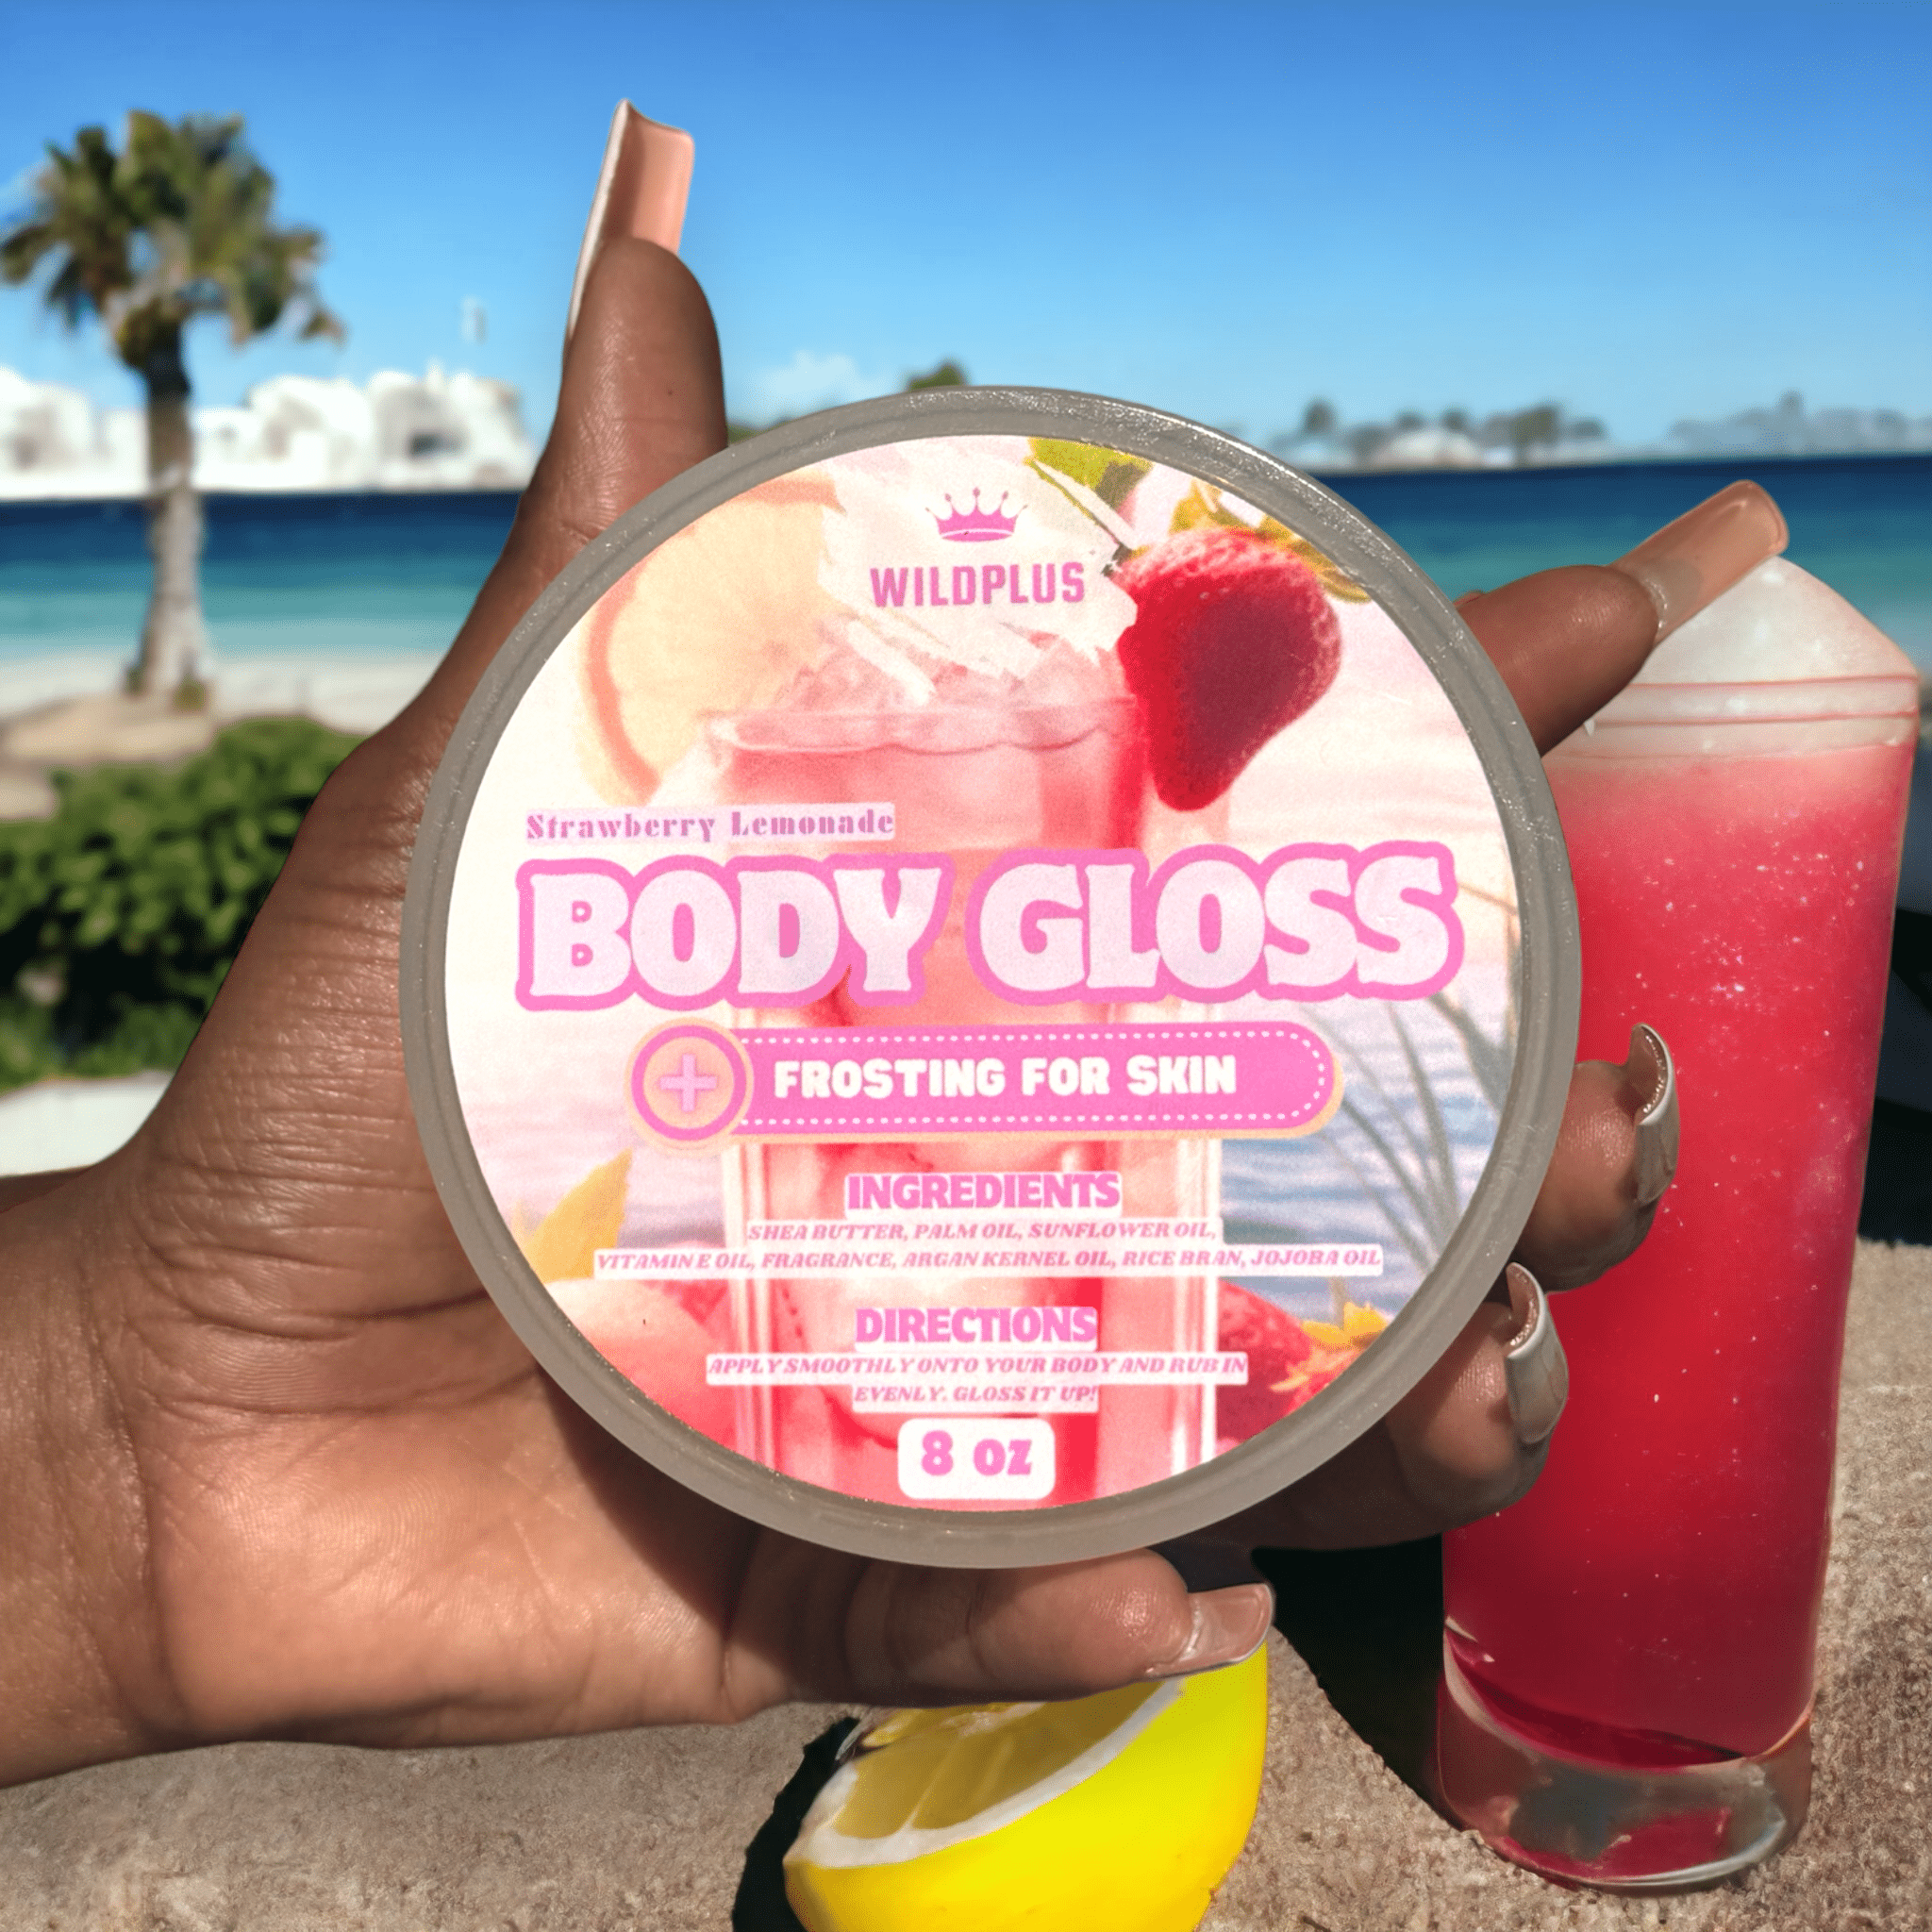 NEW) BODY GLOSS: Select your scent! – WildPlus